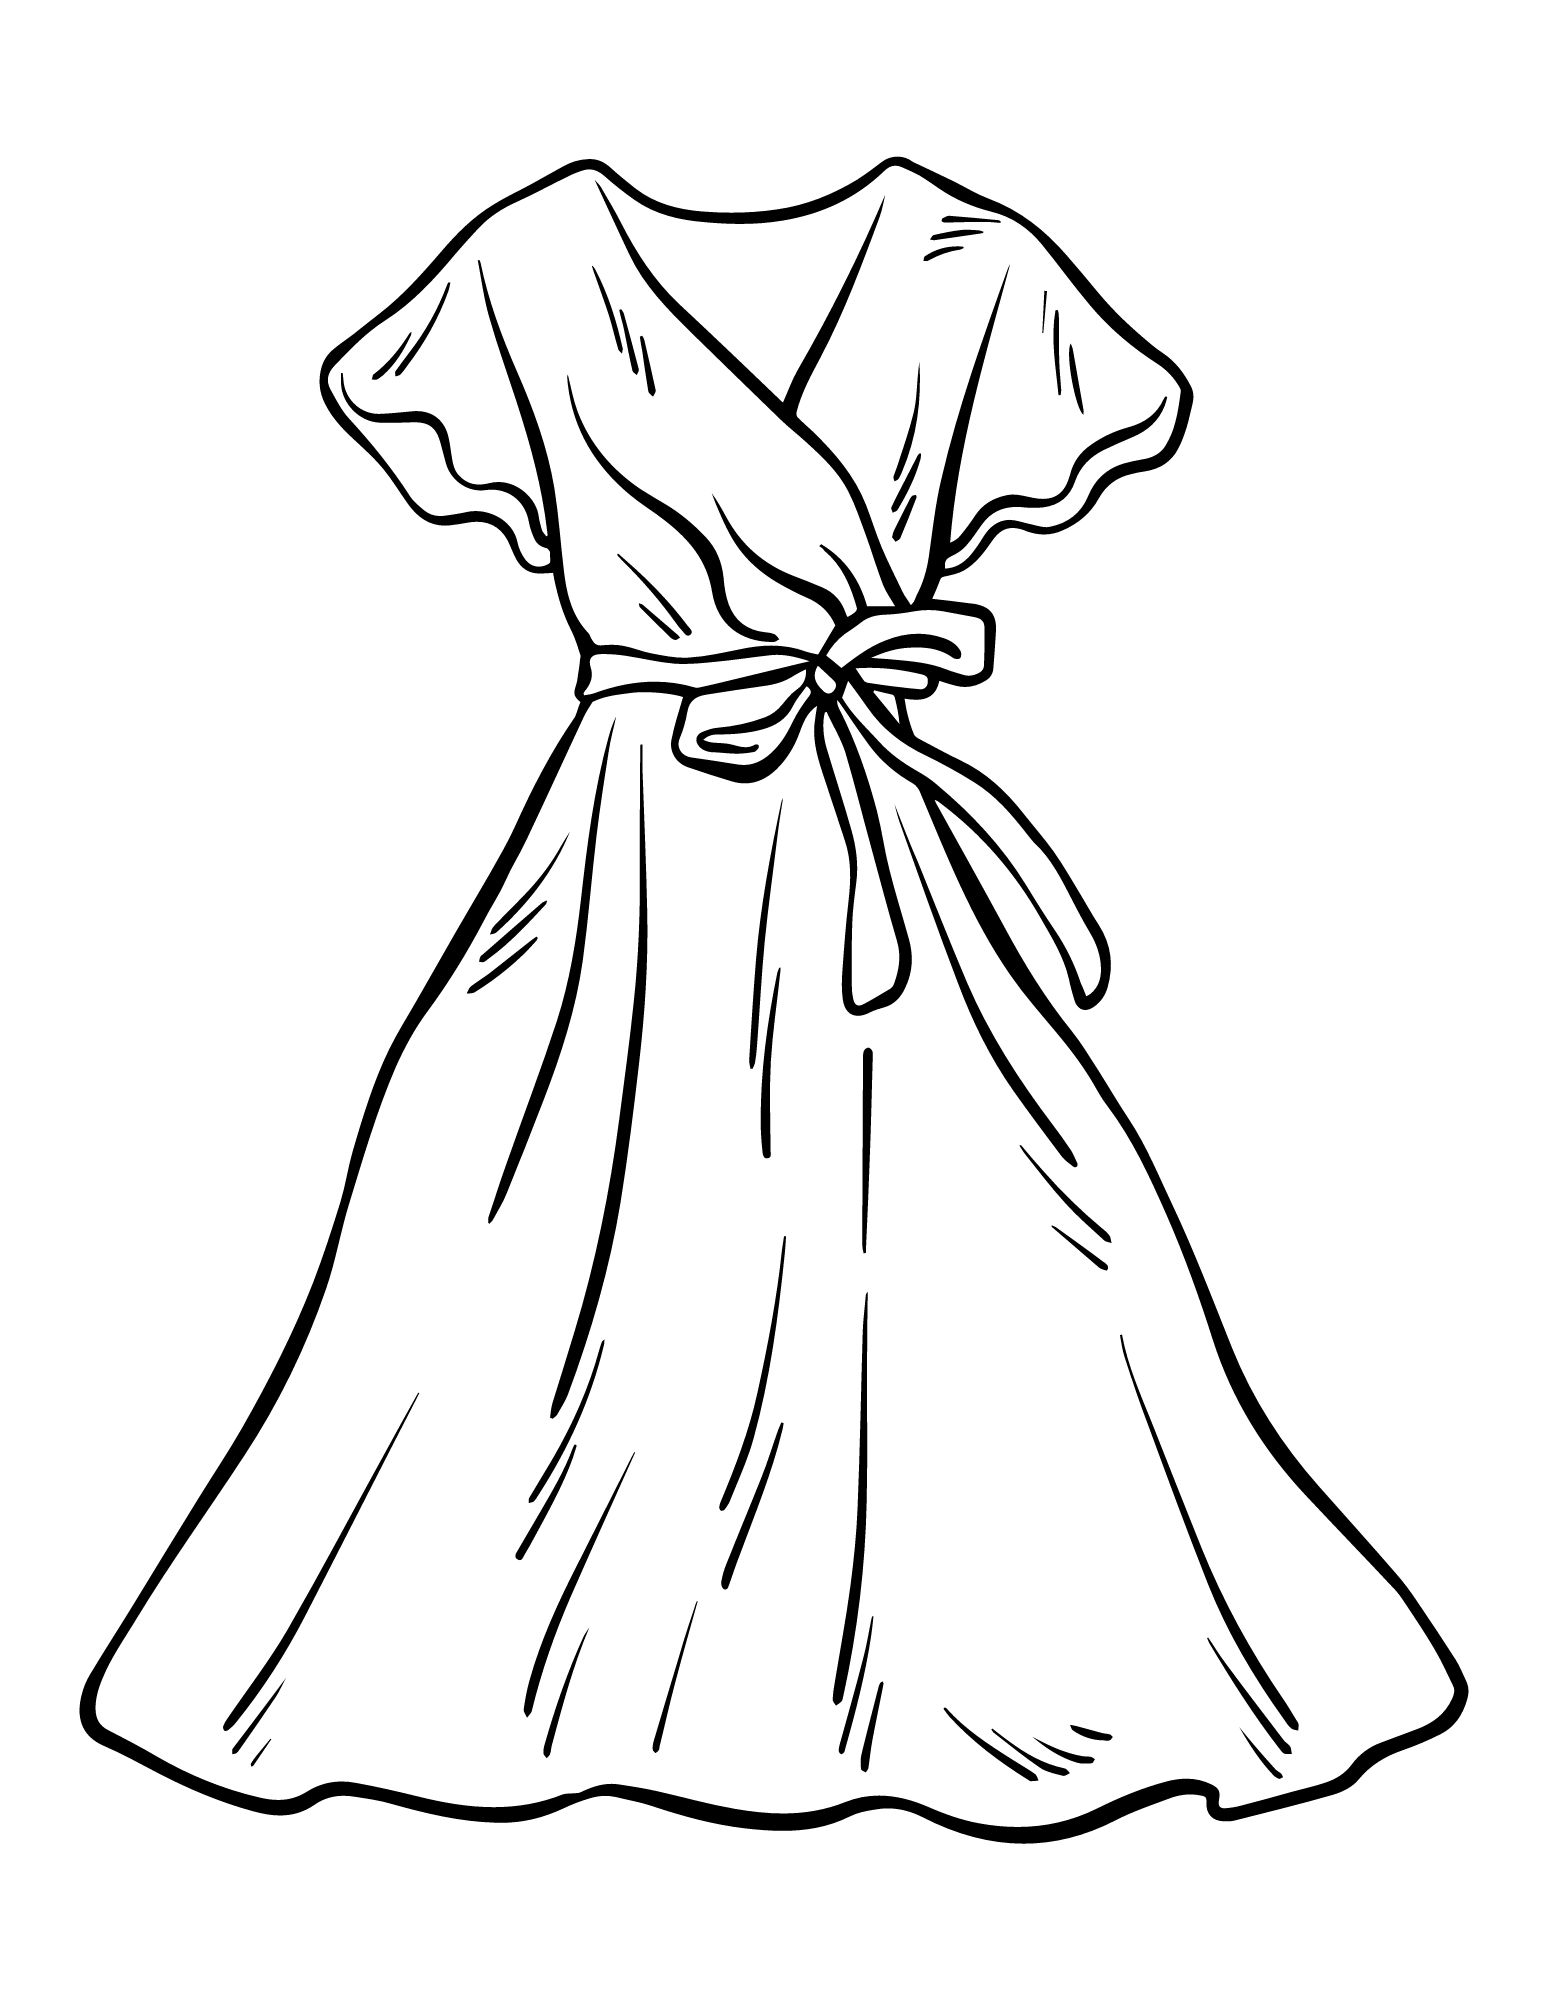 49 Stunning Dress Coloring Pages For Kids And Adults - Our Mindful